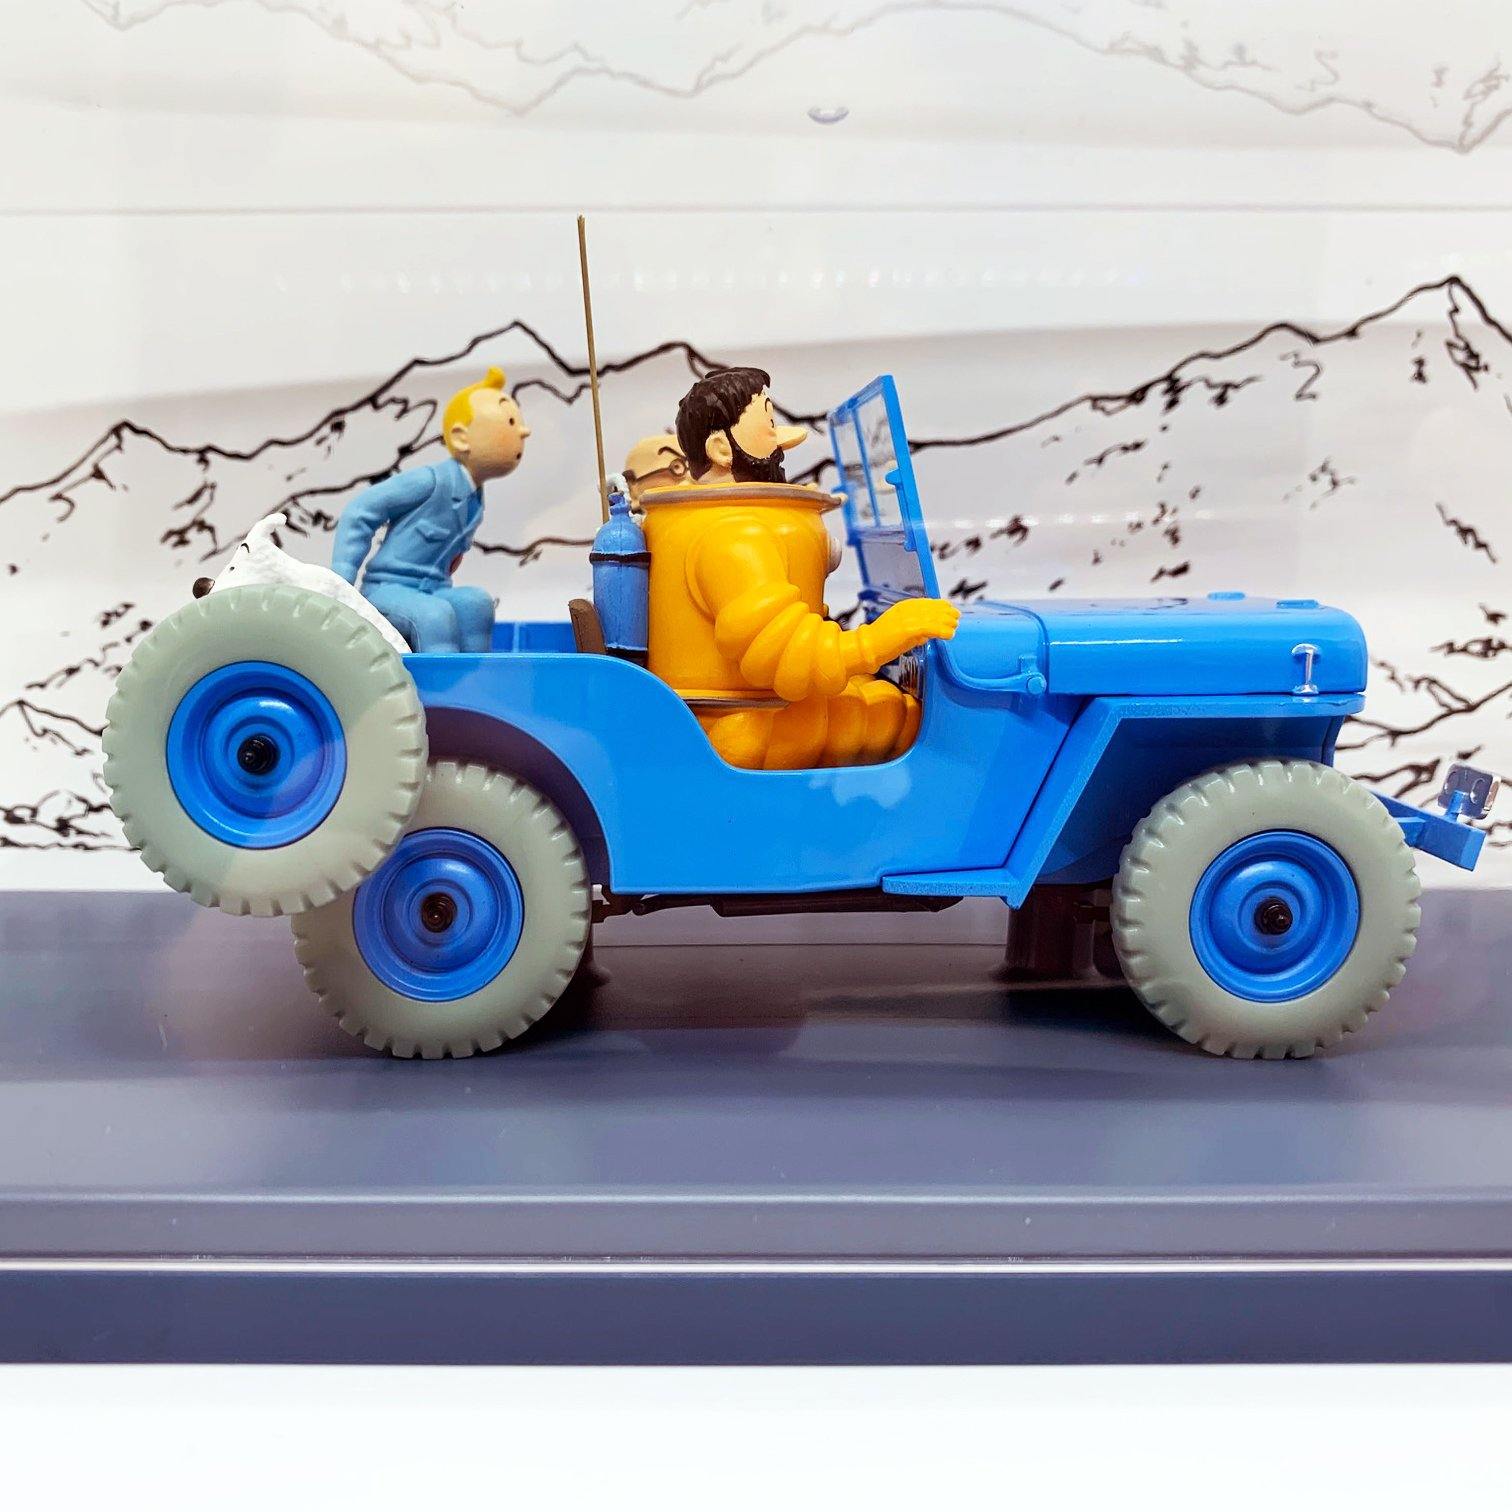 Tintin-Moulinsart Scale Car 1/24: N°04 The Blue Jeep Willys - Destination Moon - blue jeep, Captain Haddock, car, collectors item, Destination Moon, Haddock, jeep, kuifje, moulinsart, moulinsart car, tintin, willys - Gadgetz Home